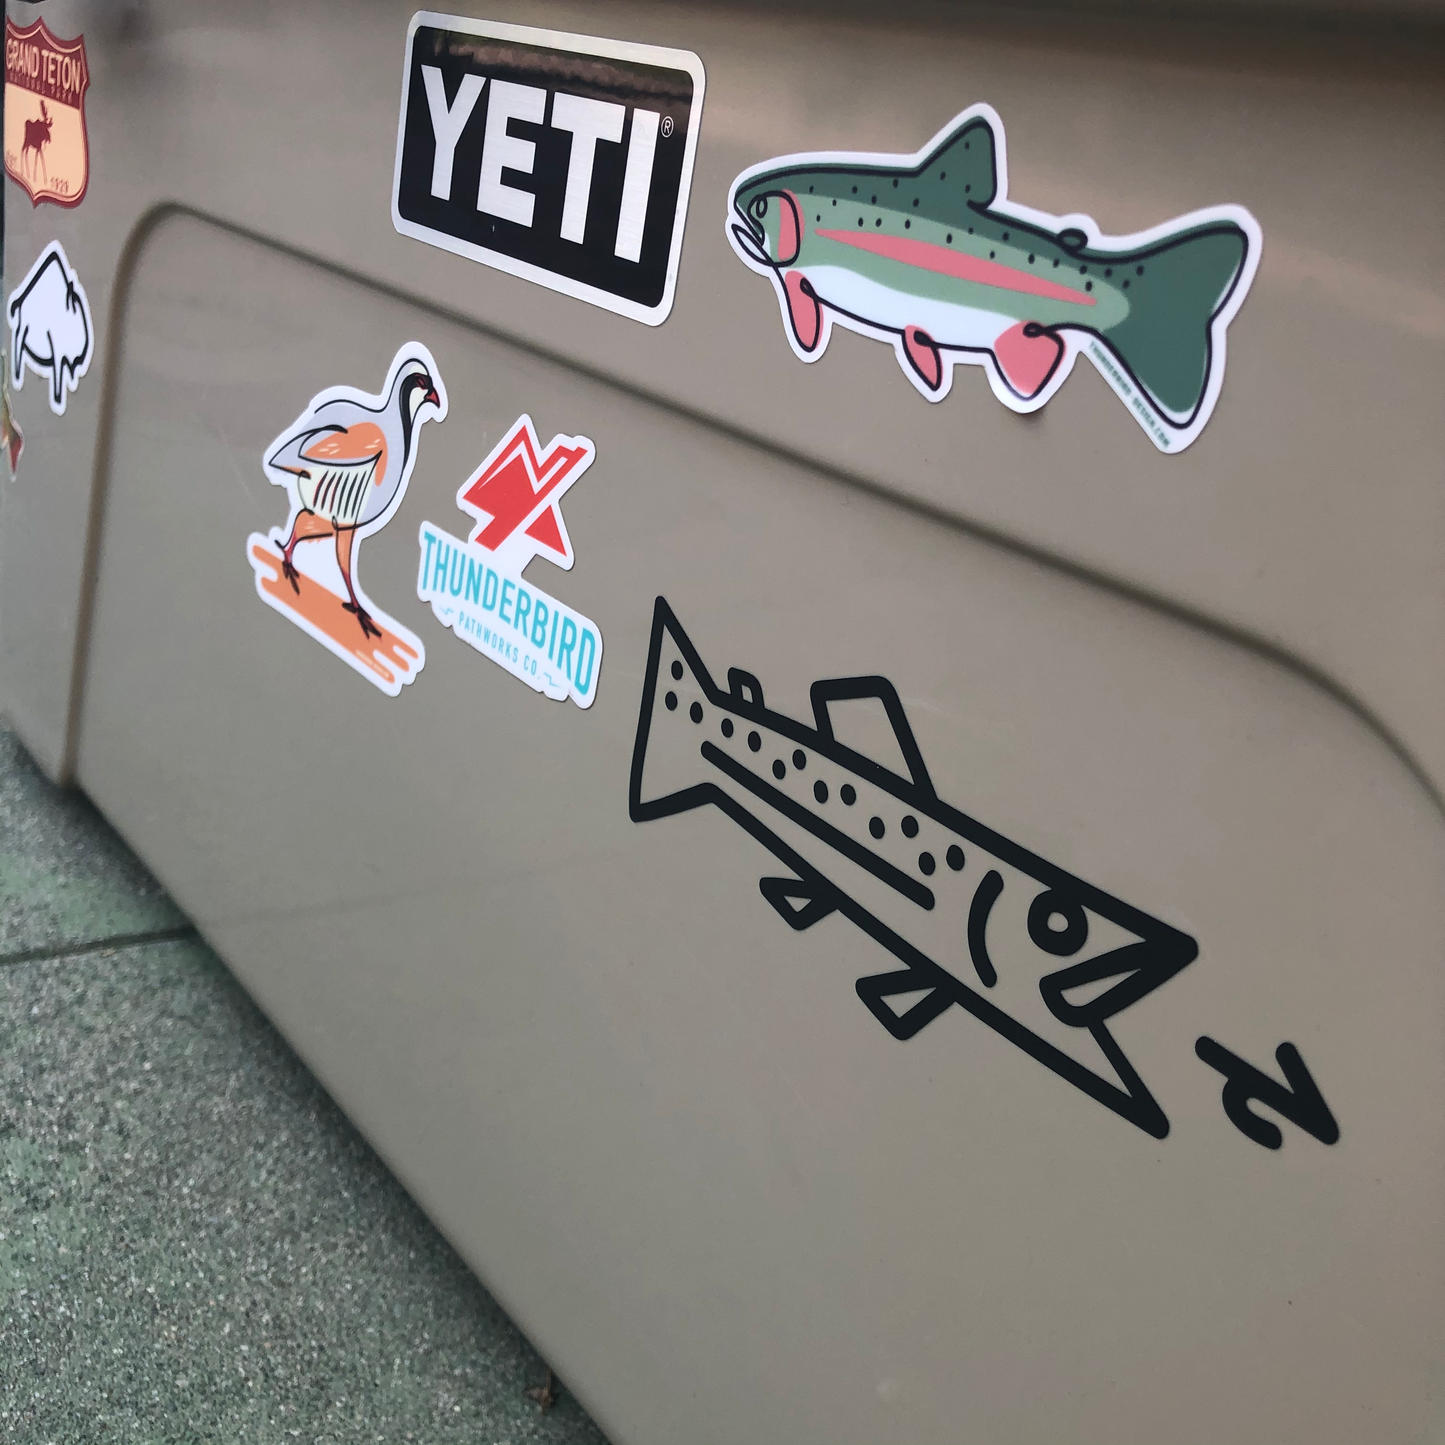 Thunderbird Design StudioIcon Trout Series - Transfer DecalsIcon Trout Series - Transfer Decals
6" Transfer decals are perfect to personalize your gear and whatever else you can stick it to. 
10% of all proceeds are donated to conservation efforts to help prot